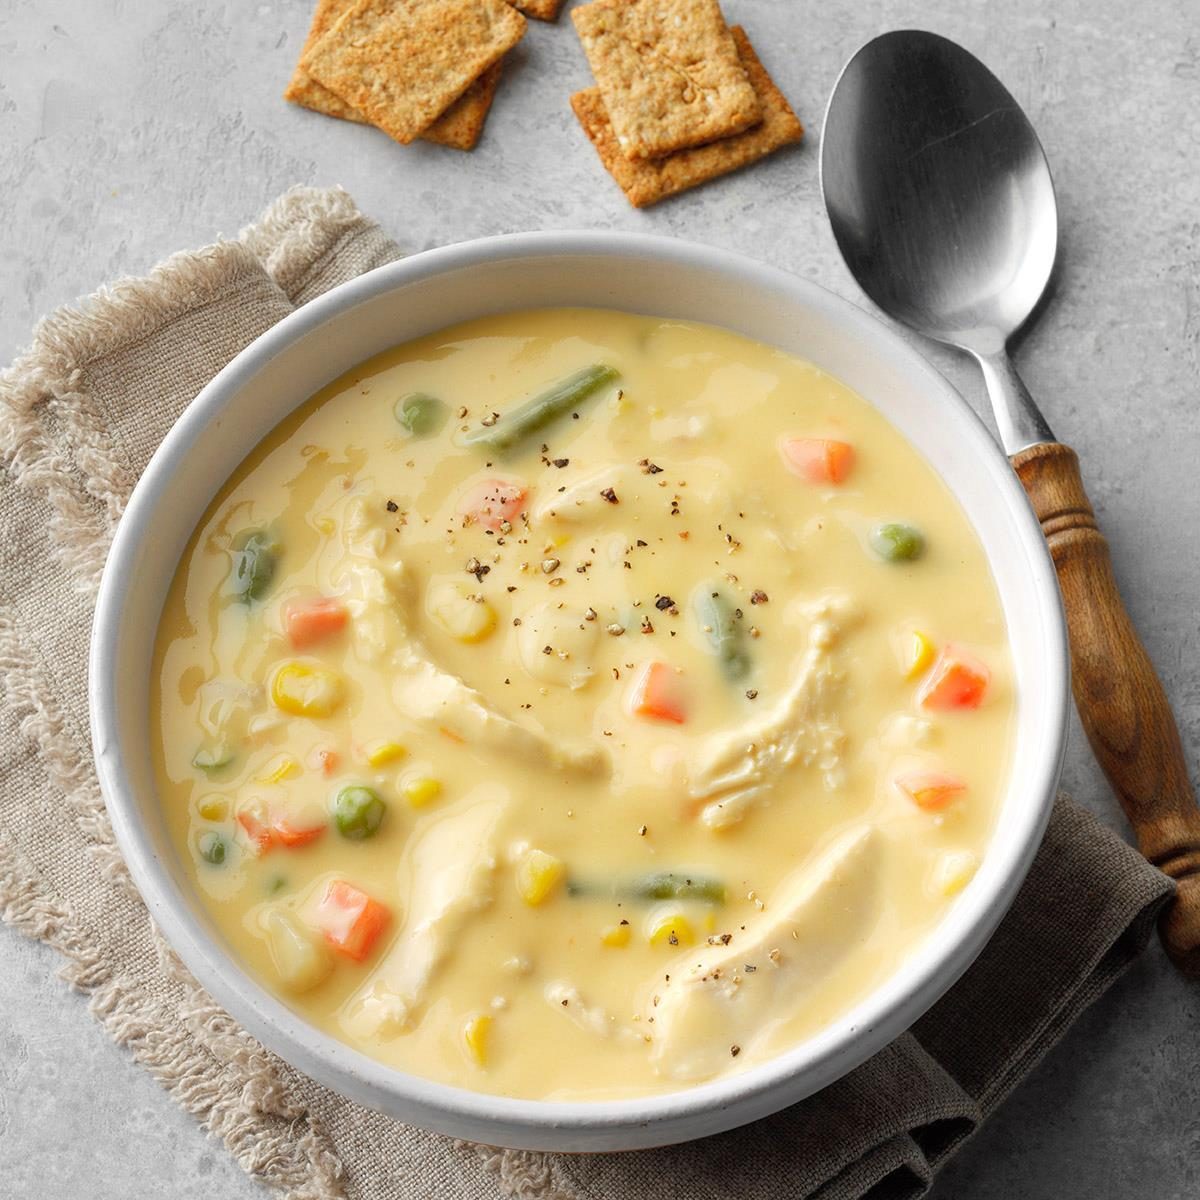 Cheese Chicken Soup Recipe: How to Make It